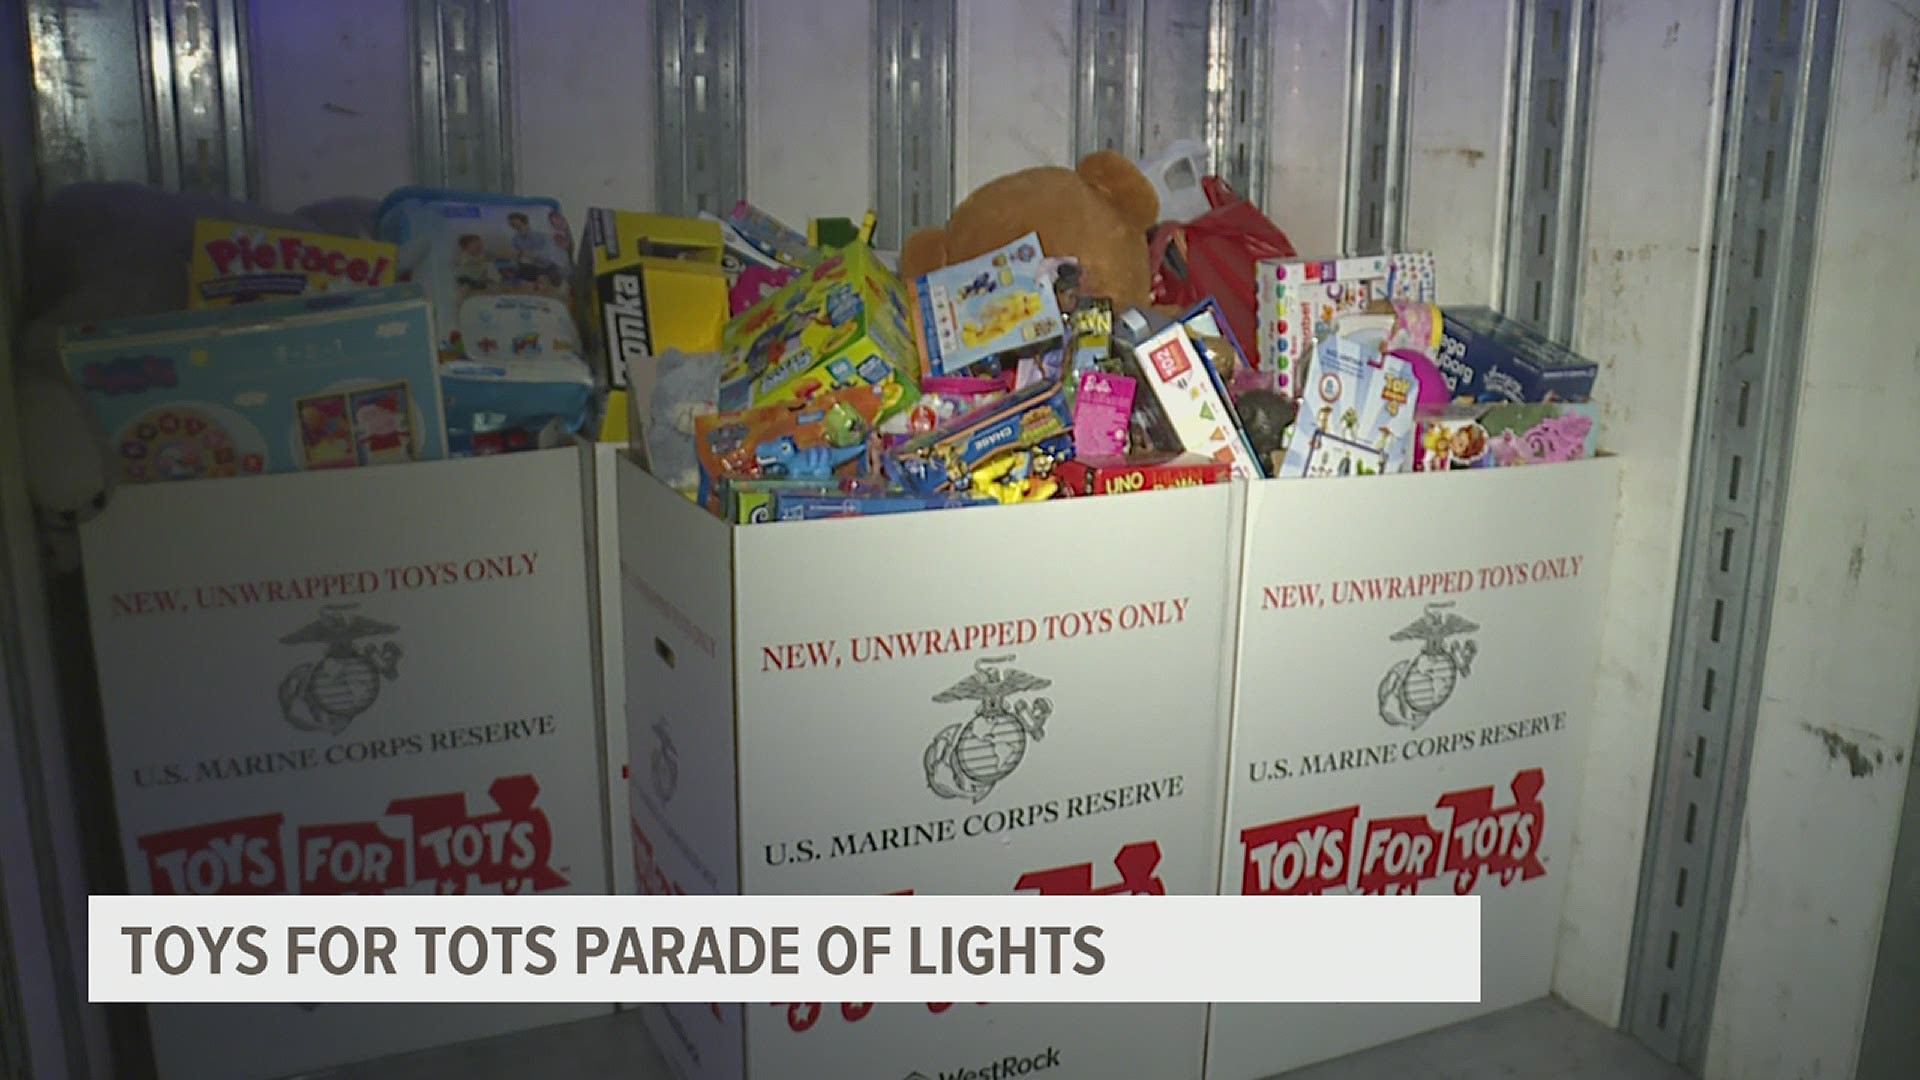 Toys For Tots parade of lights